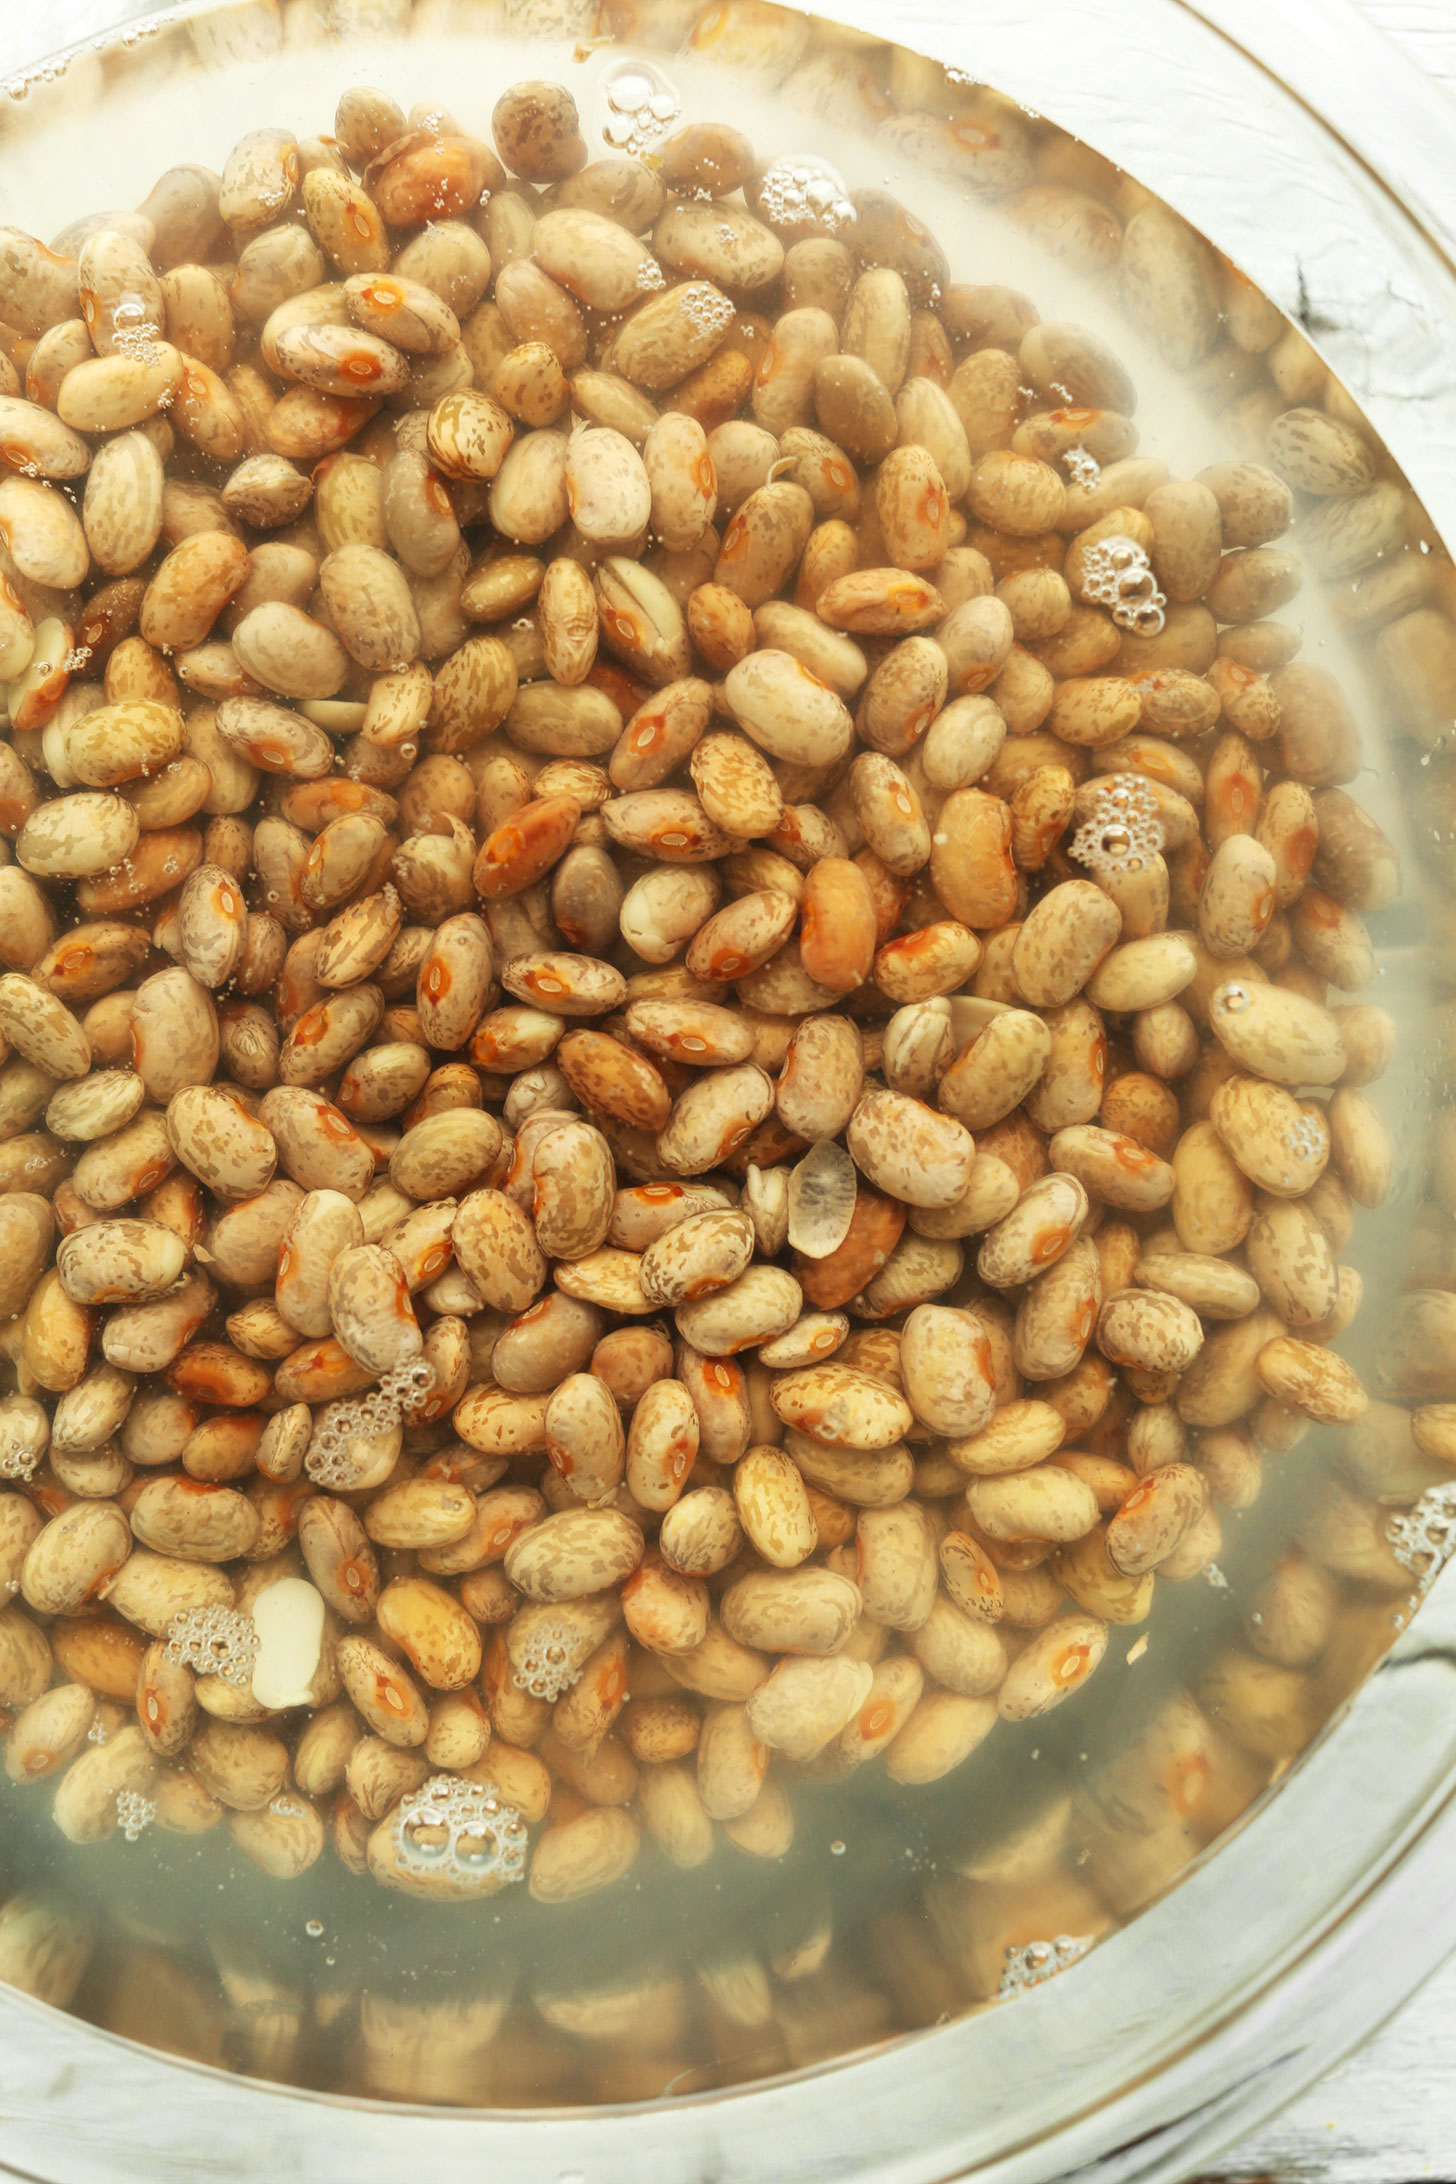 Soaking dry pinto beans in water for our tutorial on How to Cook Pinto Beans